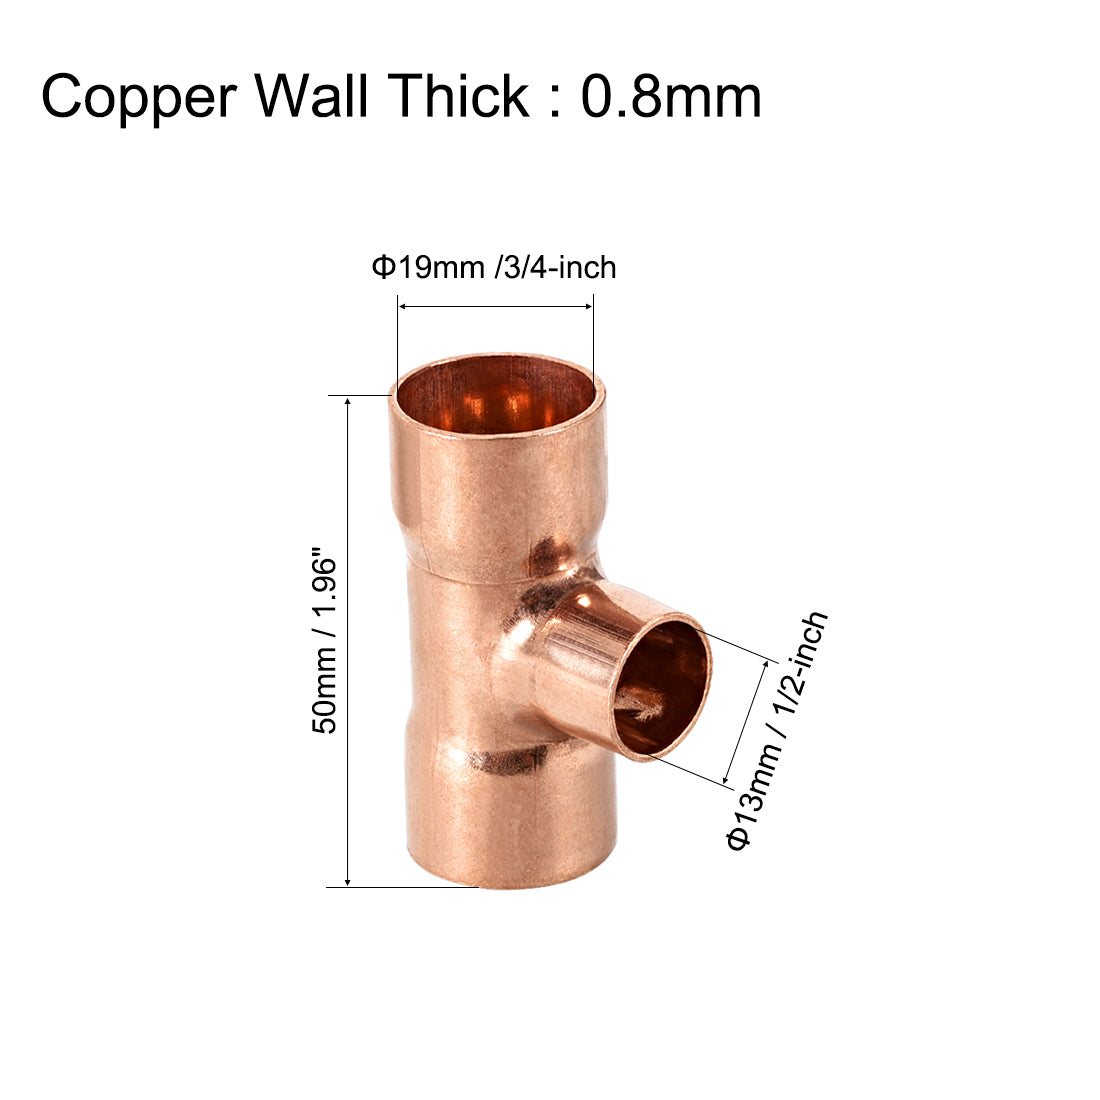 Uxcell Uxcell 7/8-inch x 5/8-inch x 7/8-inch Copper Reducing Tee Copper Pressure Pipe Fitting Conector  for Plumbing Supply and Refrigeration